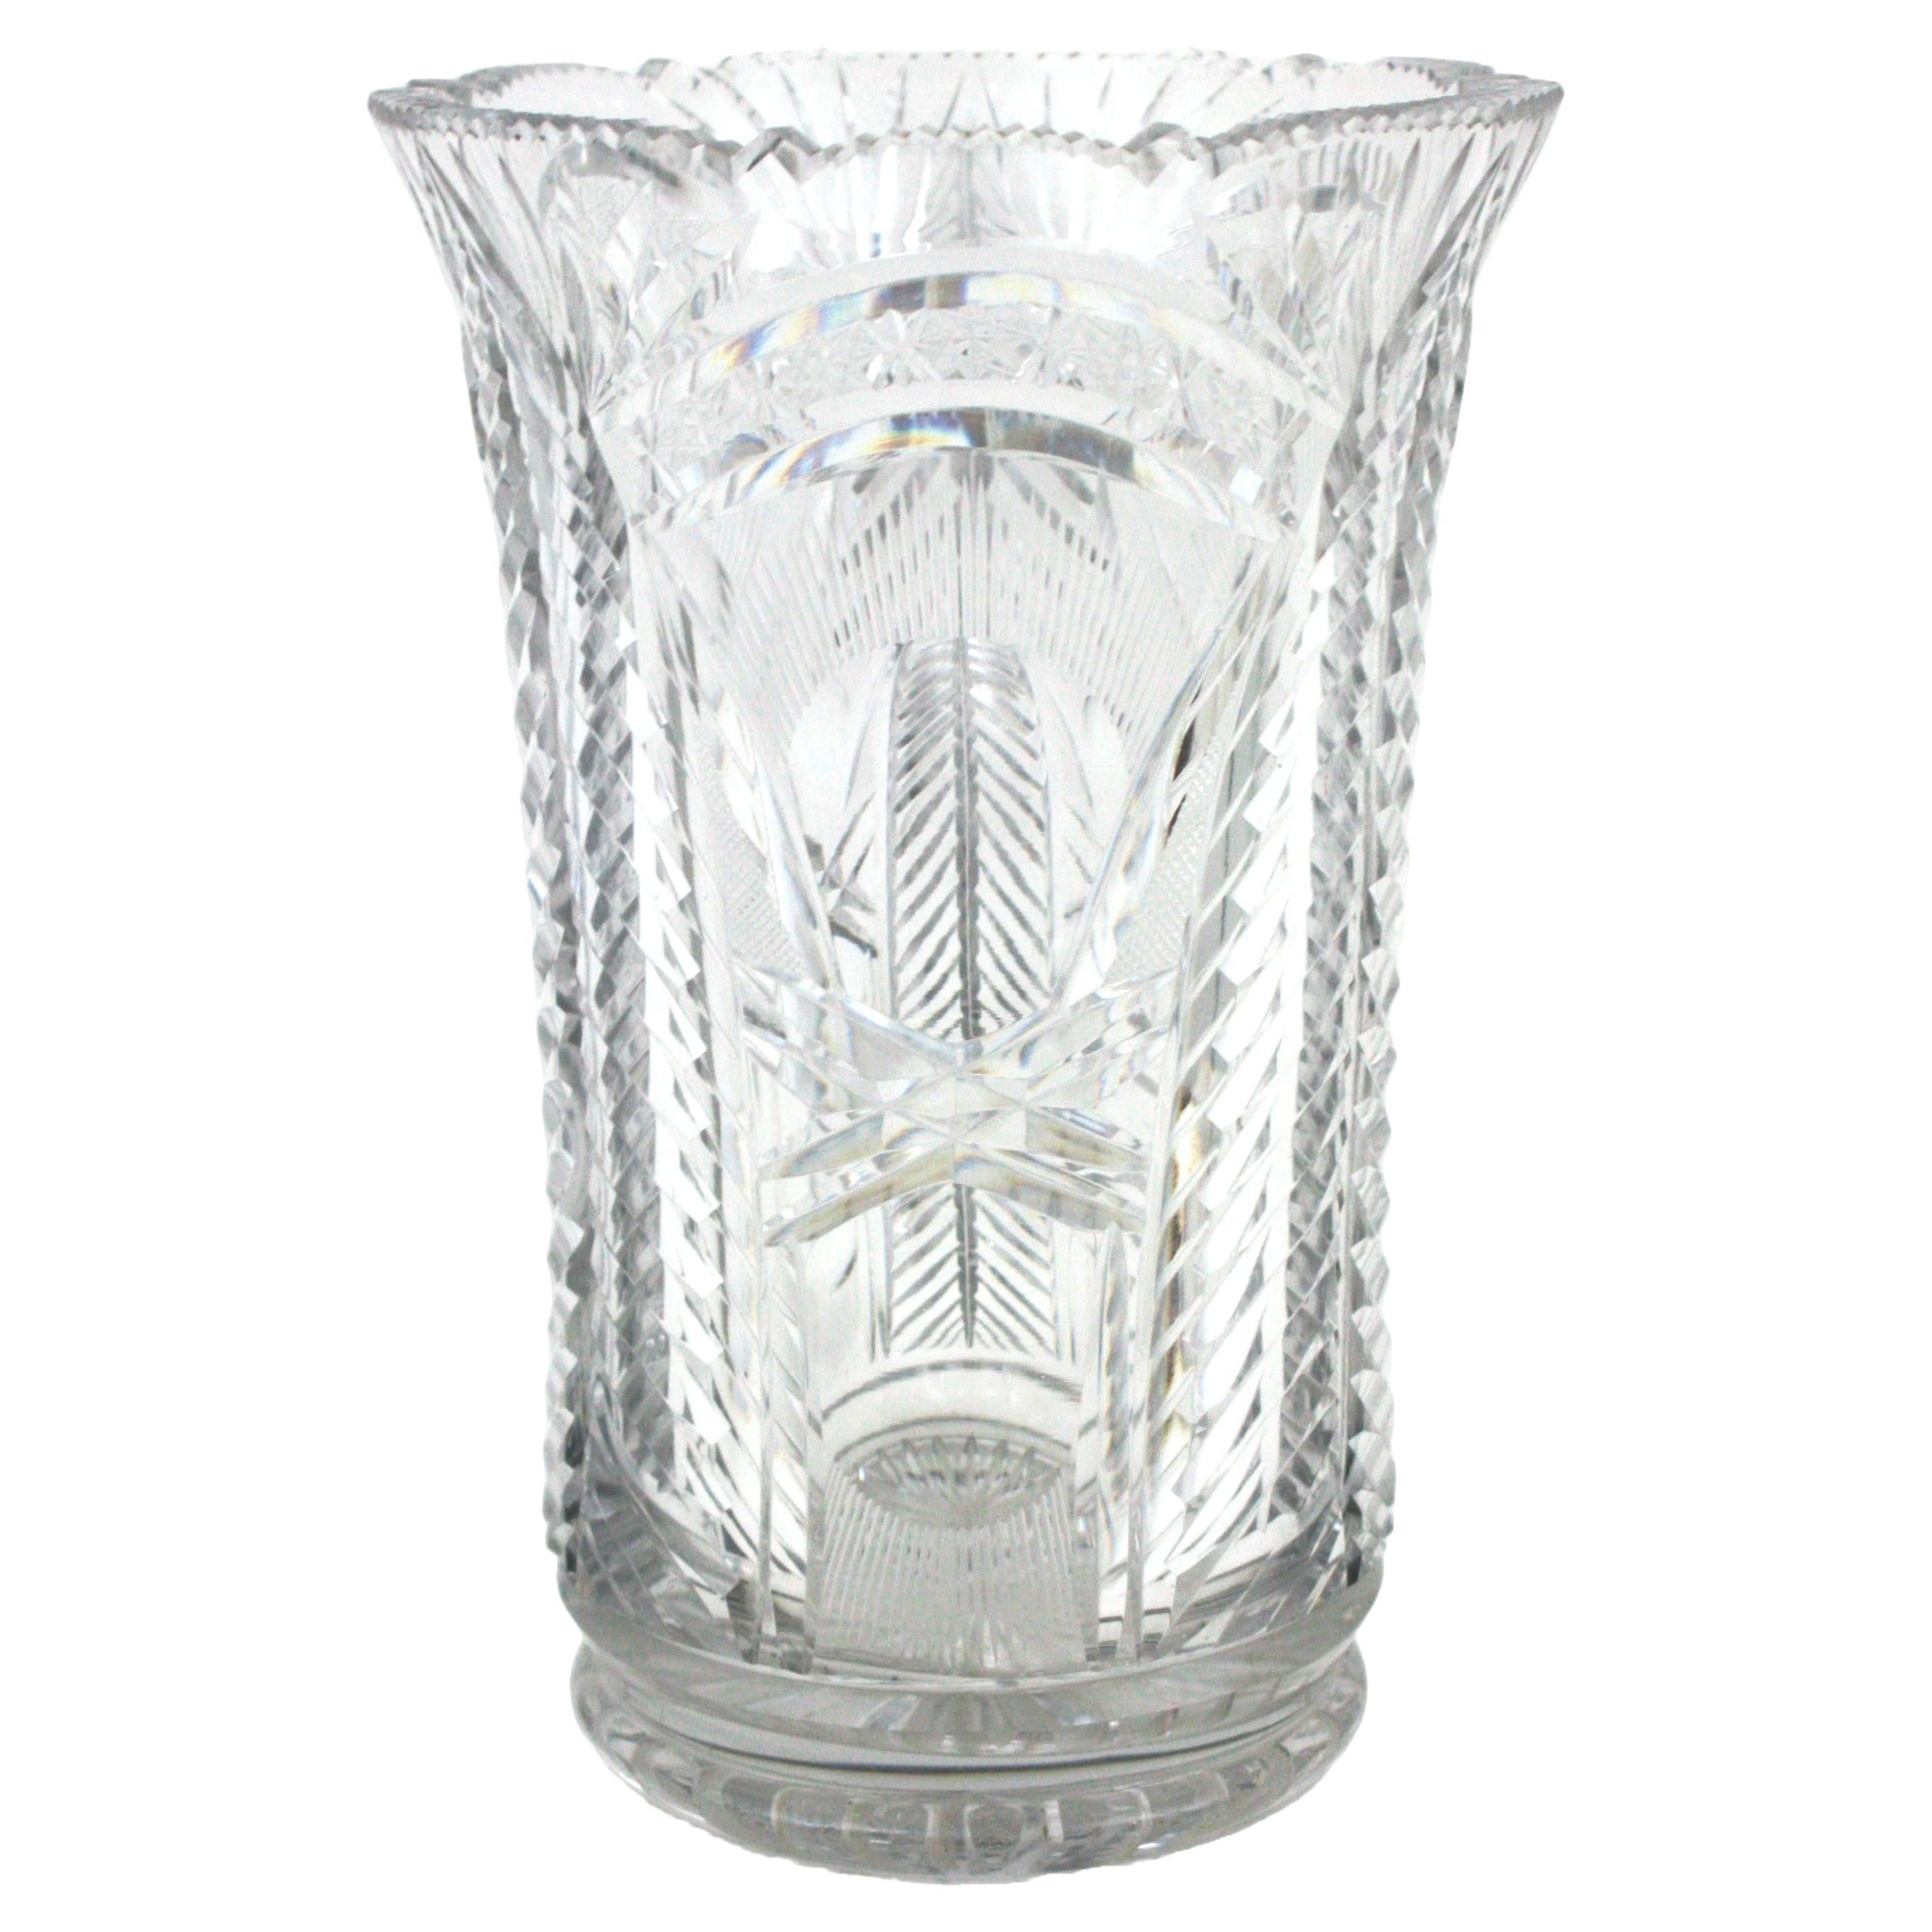 Eye-catching cut crystal vase with scalloped top. Spain, 1930s.
This Art Deco vases is finely executed with very detailed cut cristal patterns thorough.
Beautiful from all sides, it has an scalloped edge and a large interior surface that allows to